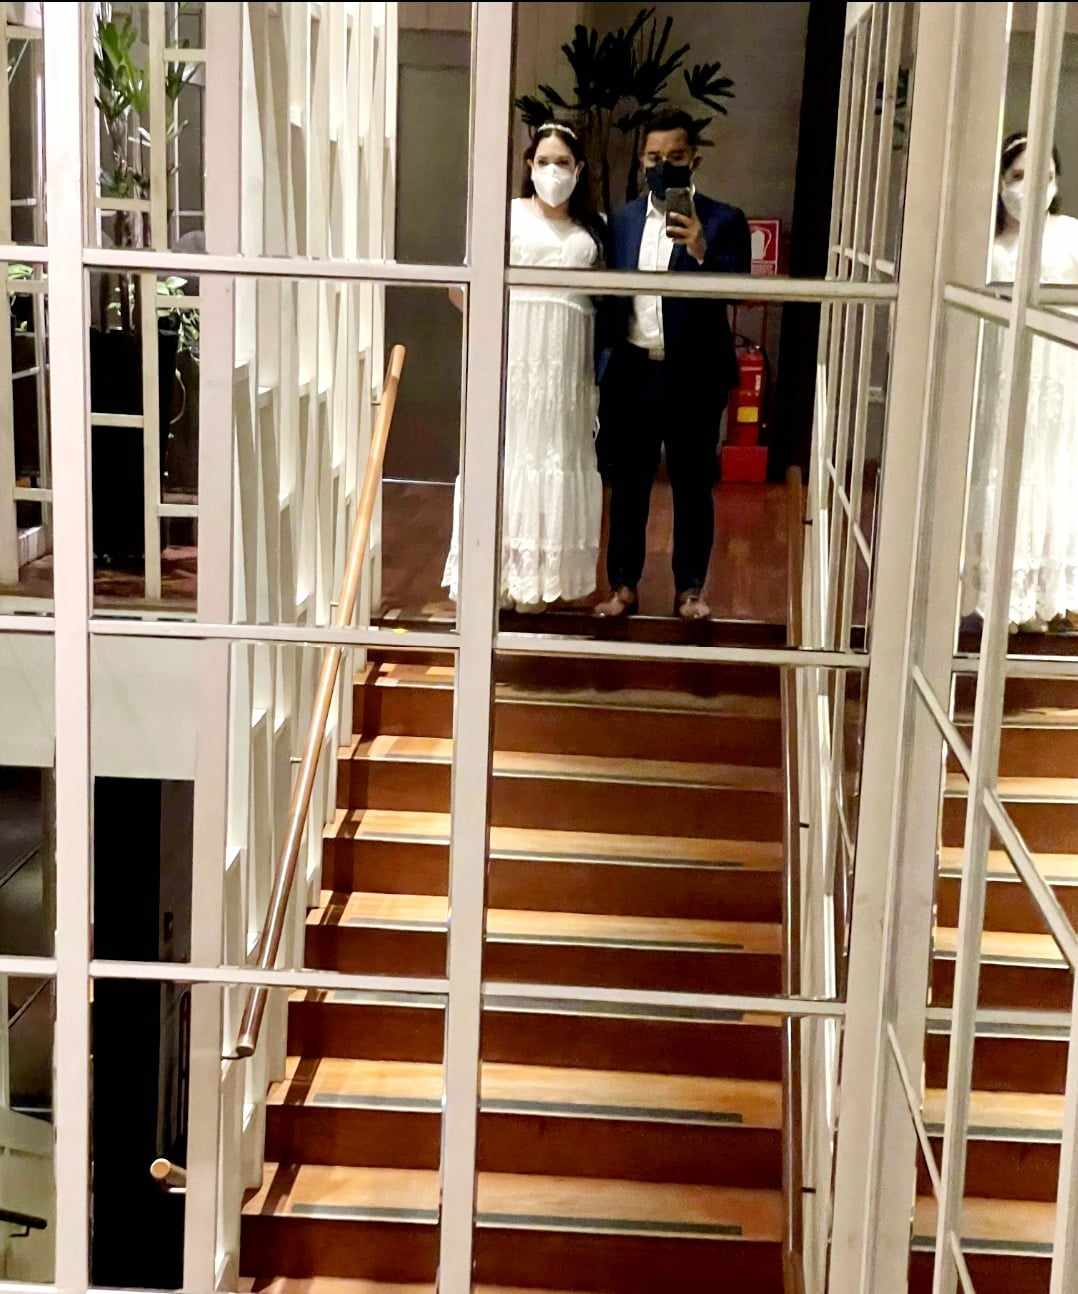 Bride and groom stand on the stairs in front of a mirror.